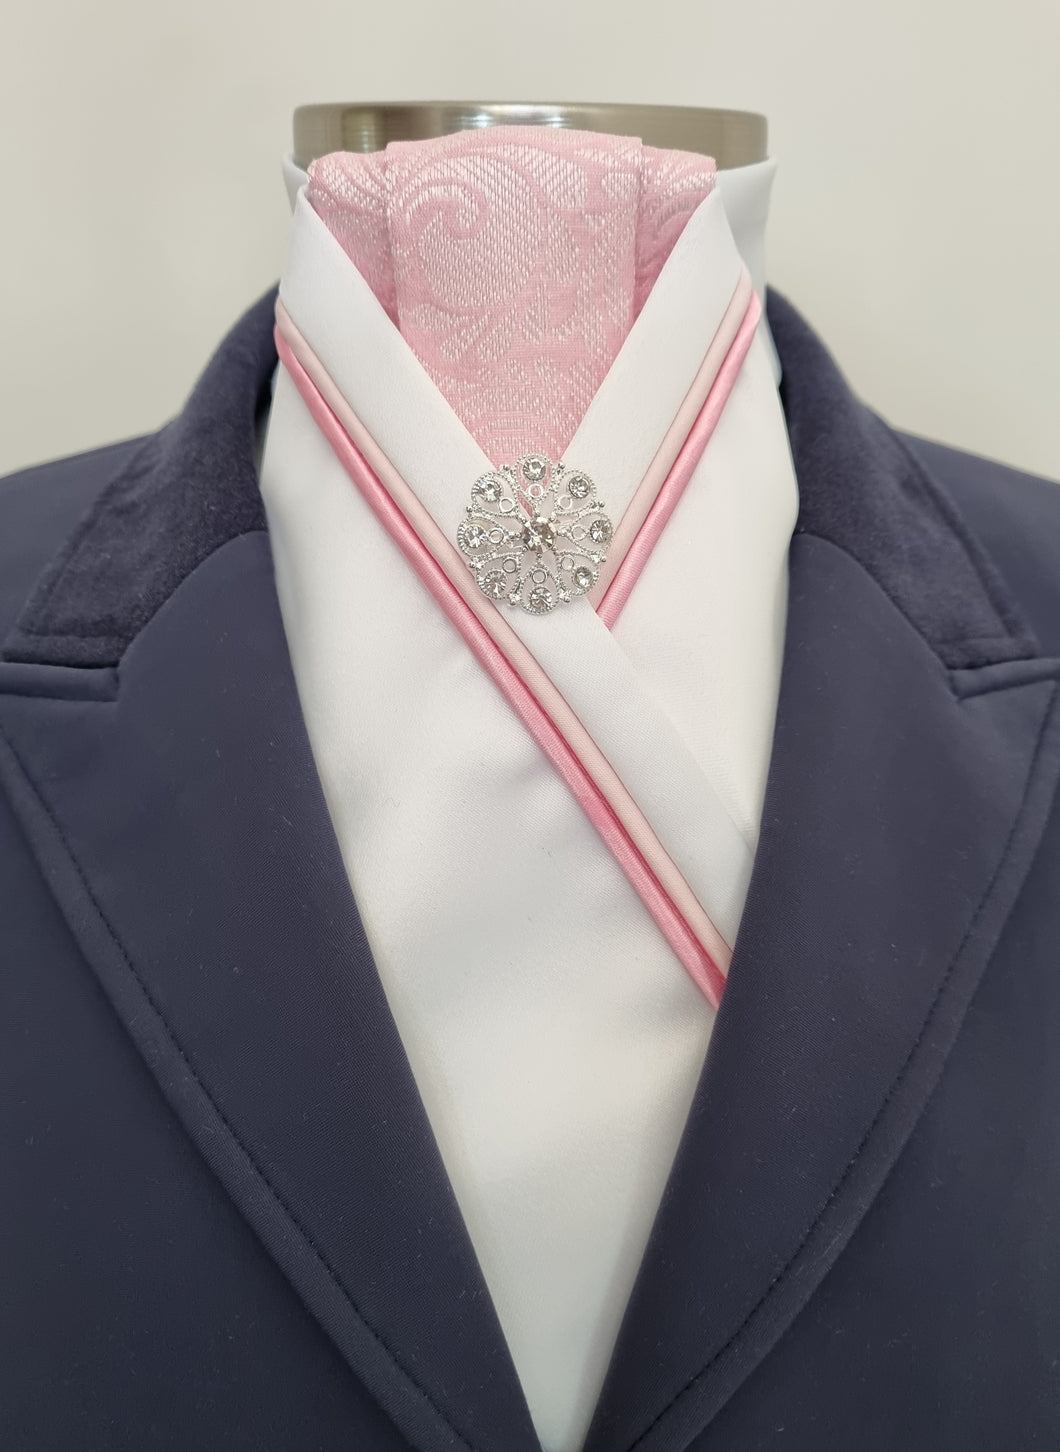 ERA ALEX STOCK TIE - White satin, pink pleated jacquard, 2 pink pipings and brooch